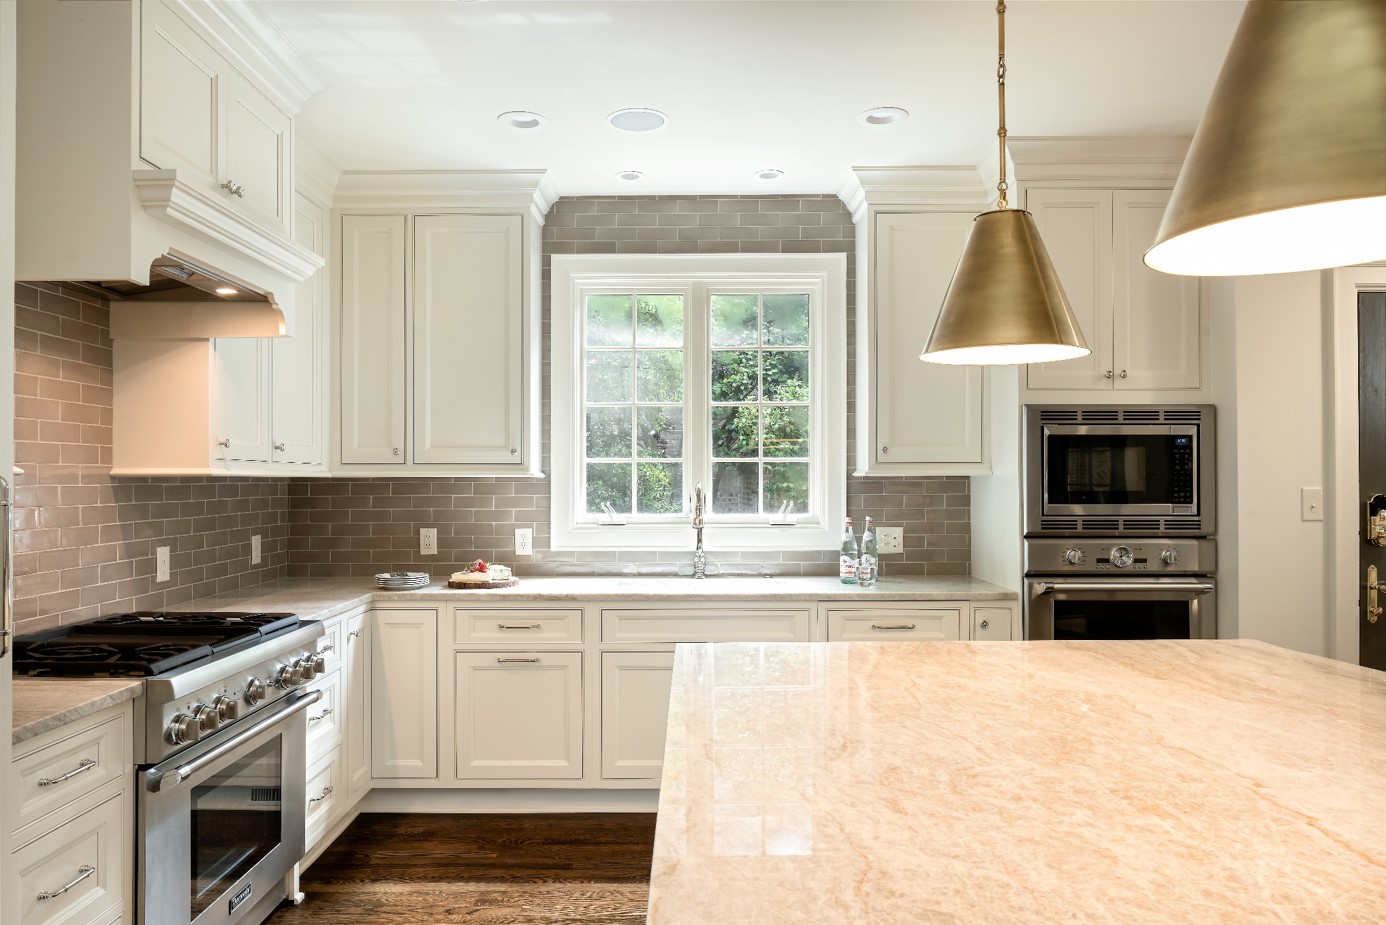 Cream kitchen with brass pendants over the island and a large window over the sink